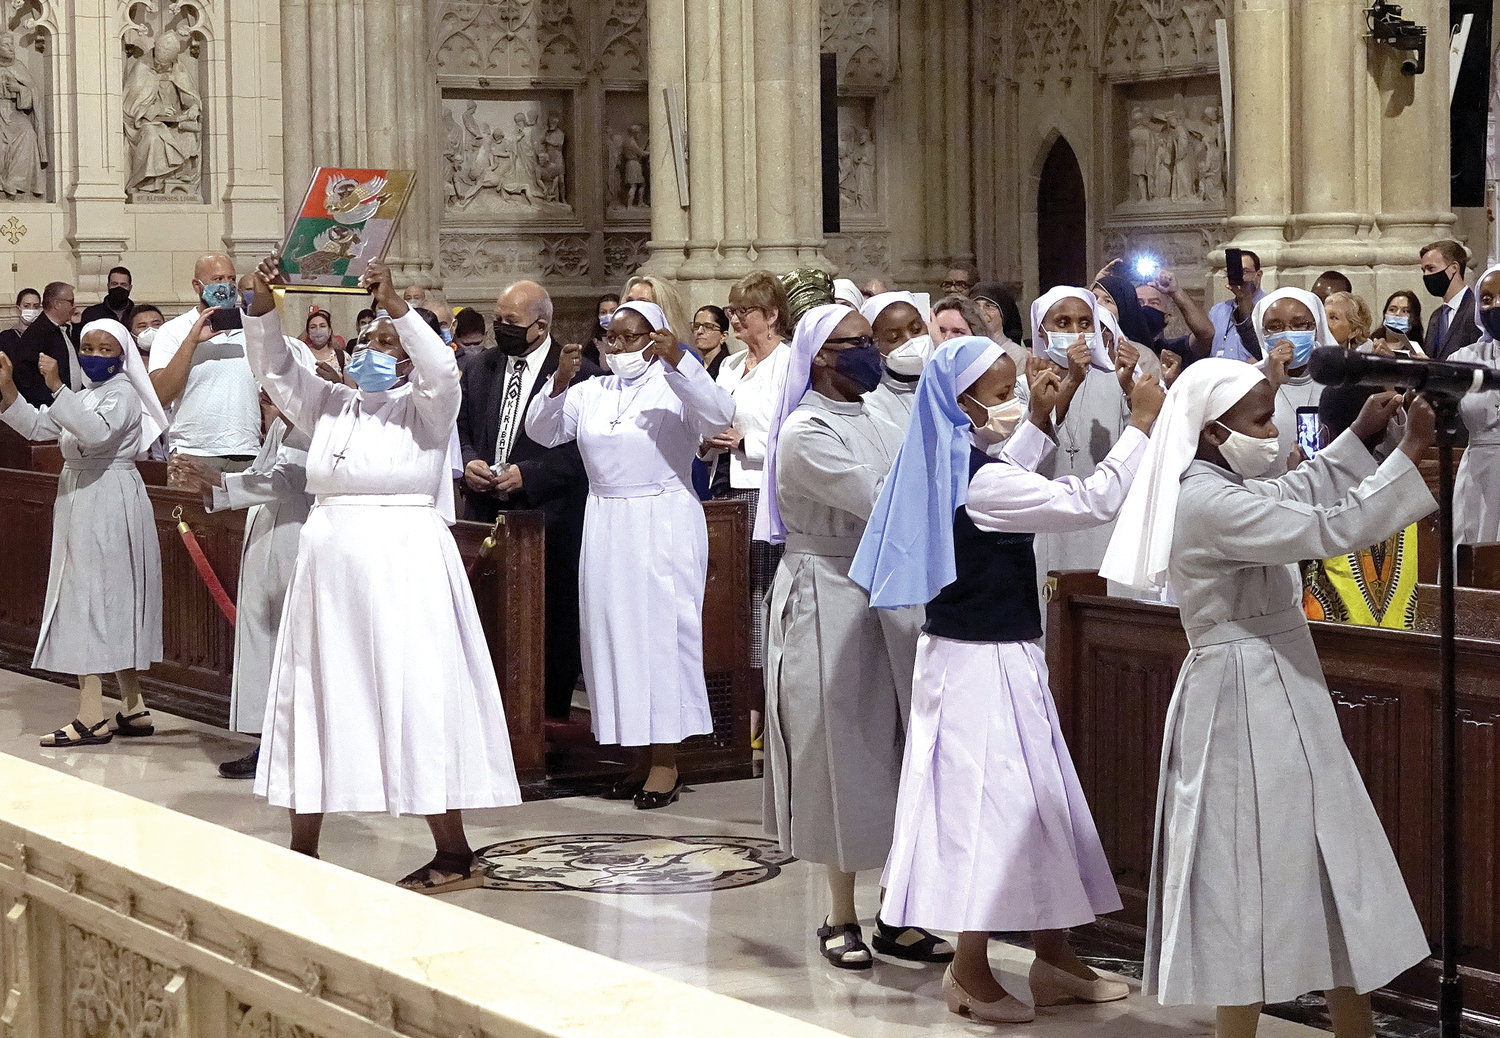 A procession by religious sisters from Kenya preceded the reading of the Gospel by Deacon Martin Asiamah of St. Luke’s parish in the Bronx during the Mass for Persecuted Christians in Africa, which Cardinal Dolan celebrated at St. Patrick’s Cathedral Sept. 9.